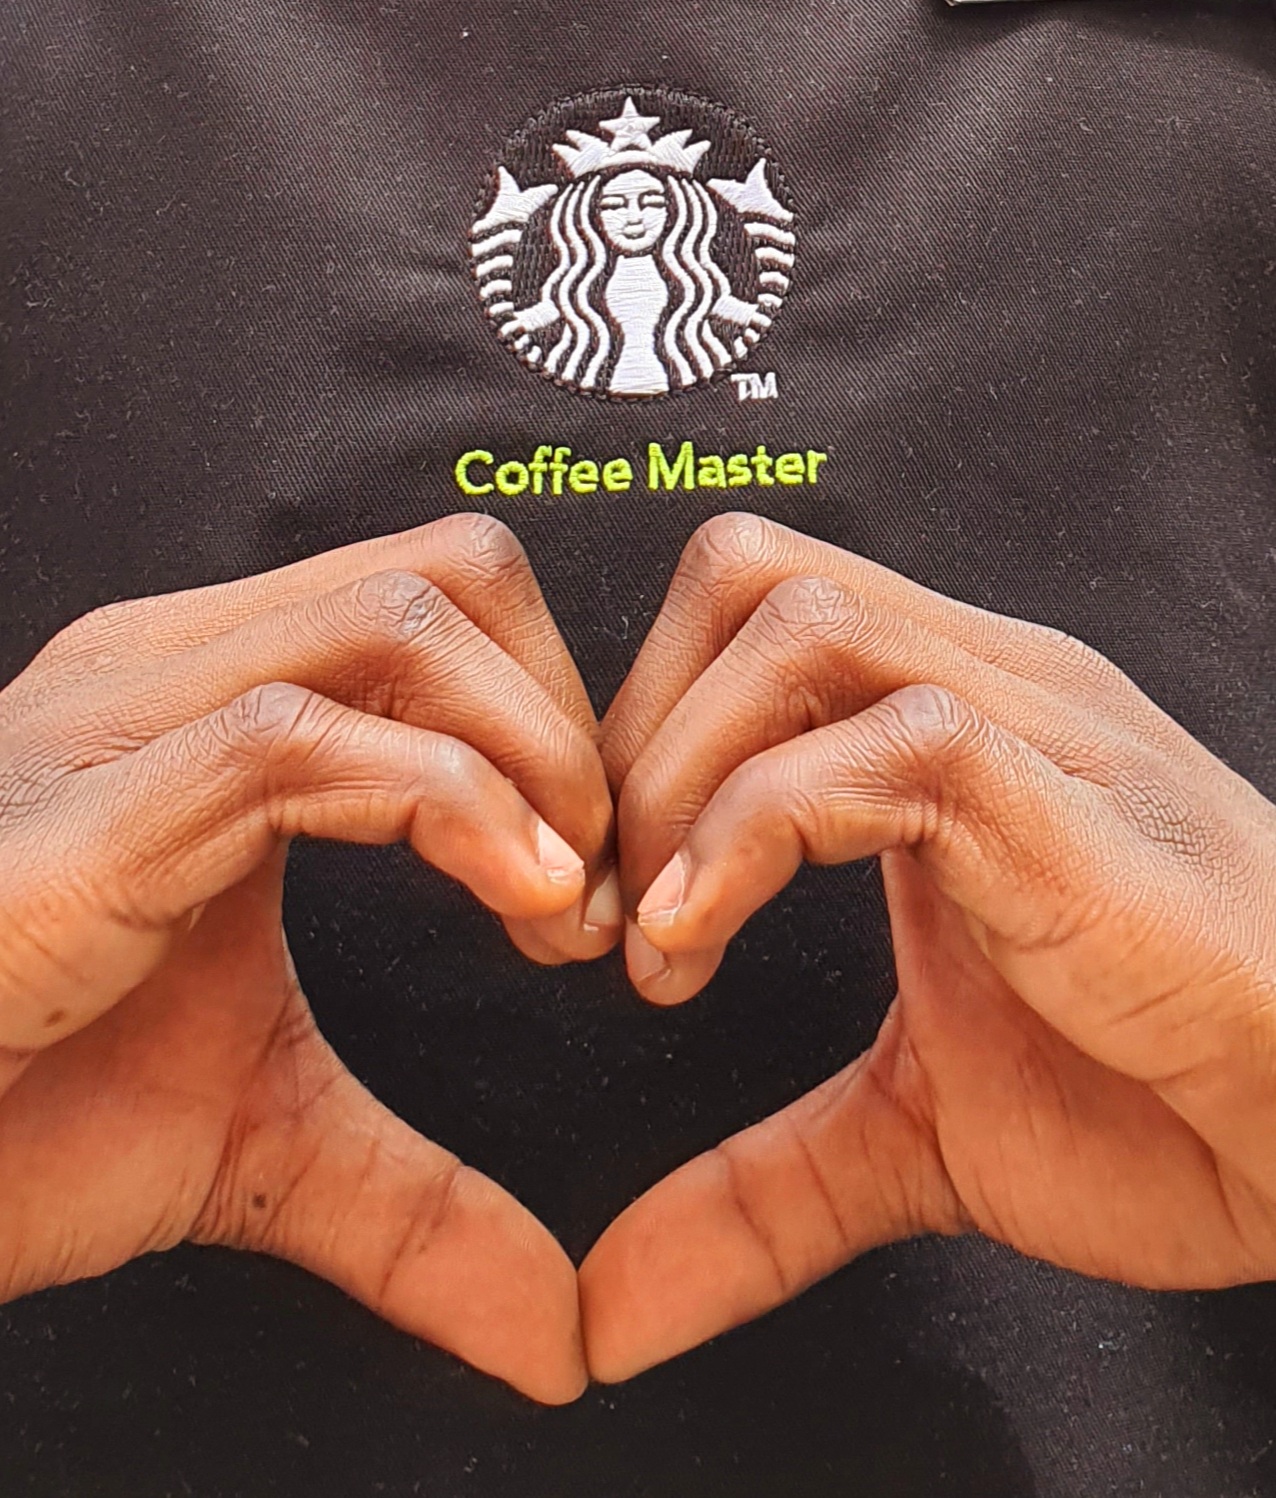 Starbucks Celebrates the Month of Human Connection in March